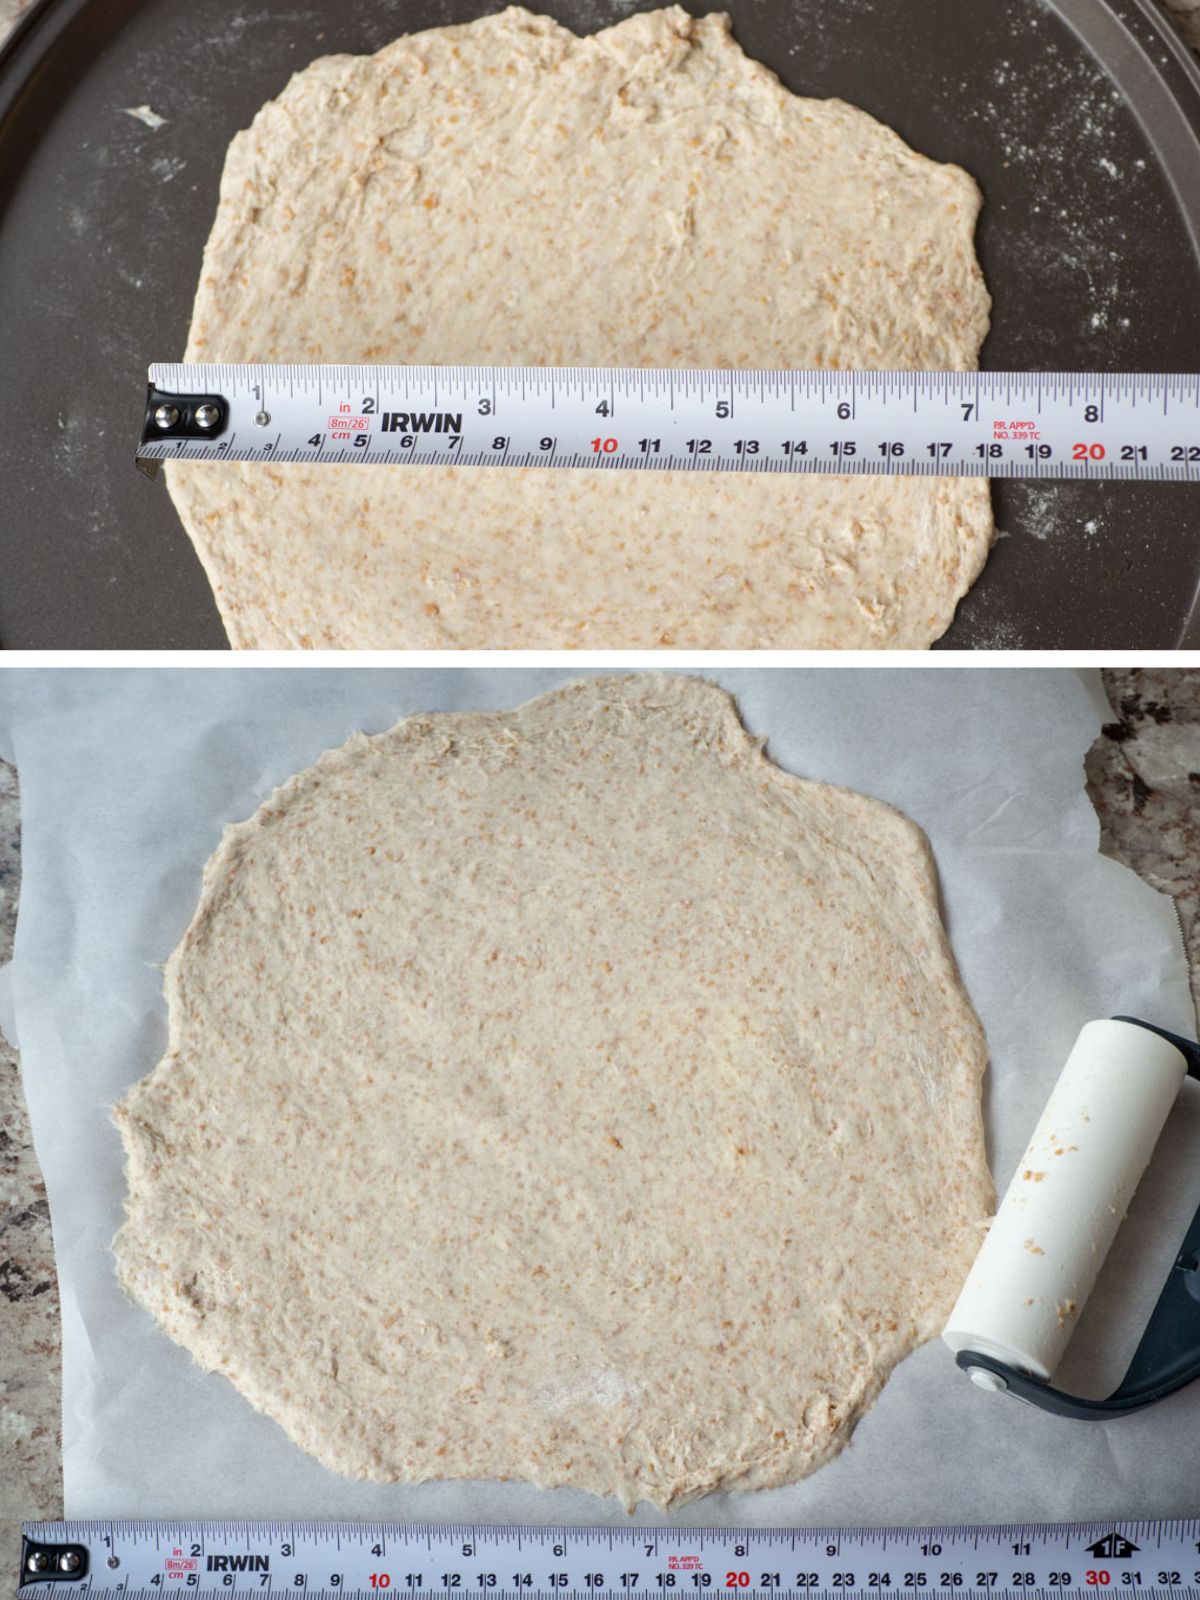 Dough rolled out in two different size options with a measuring tape showing 7 inches and 11 inches respectively.